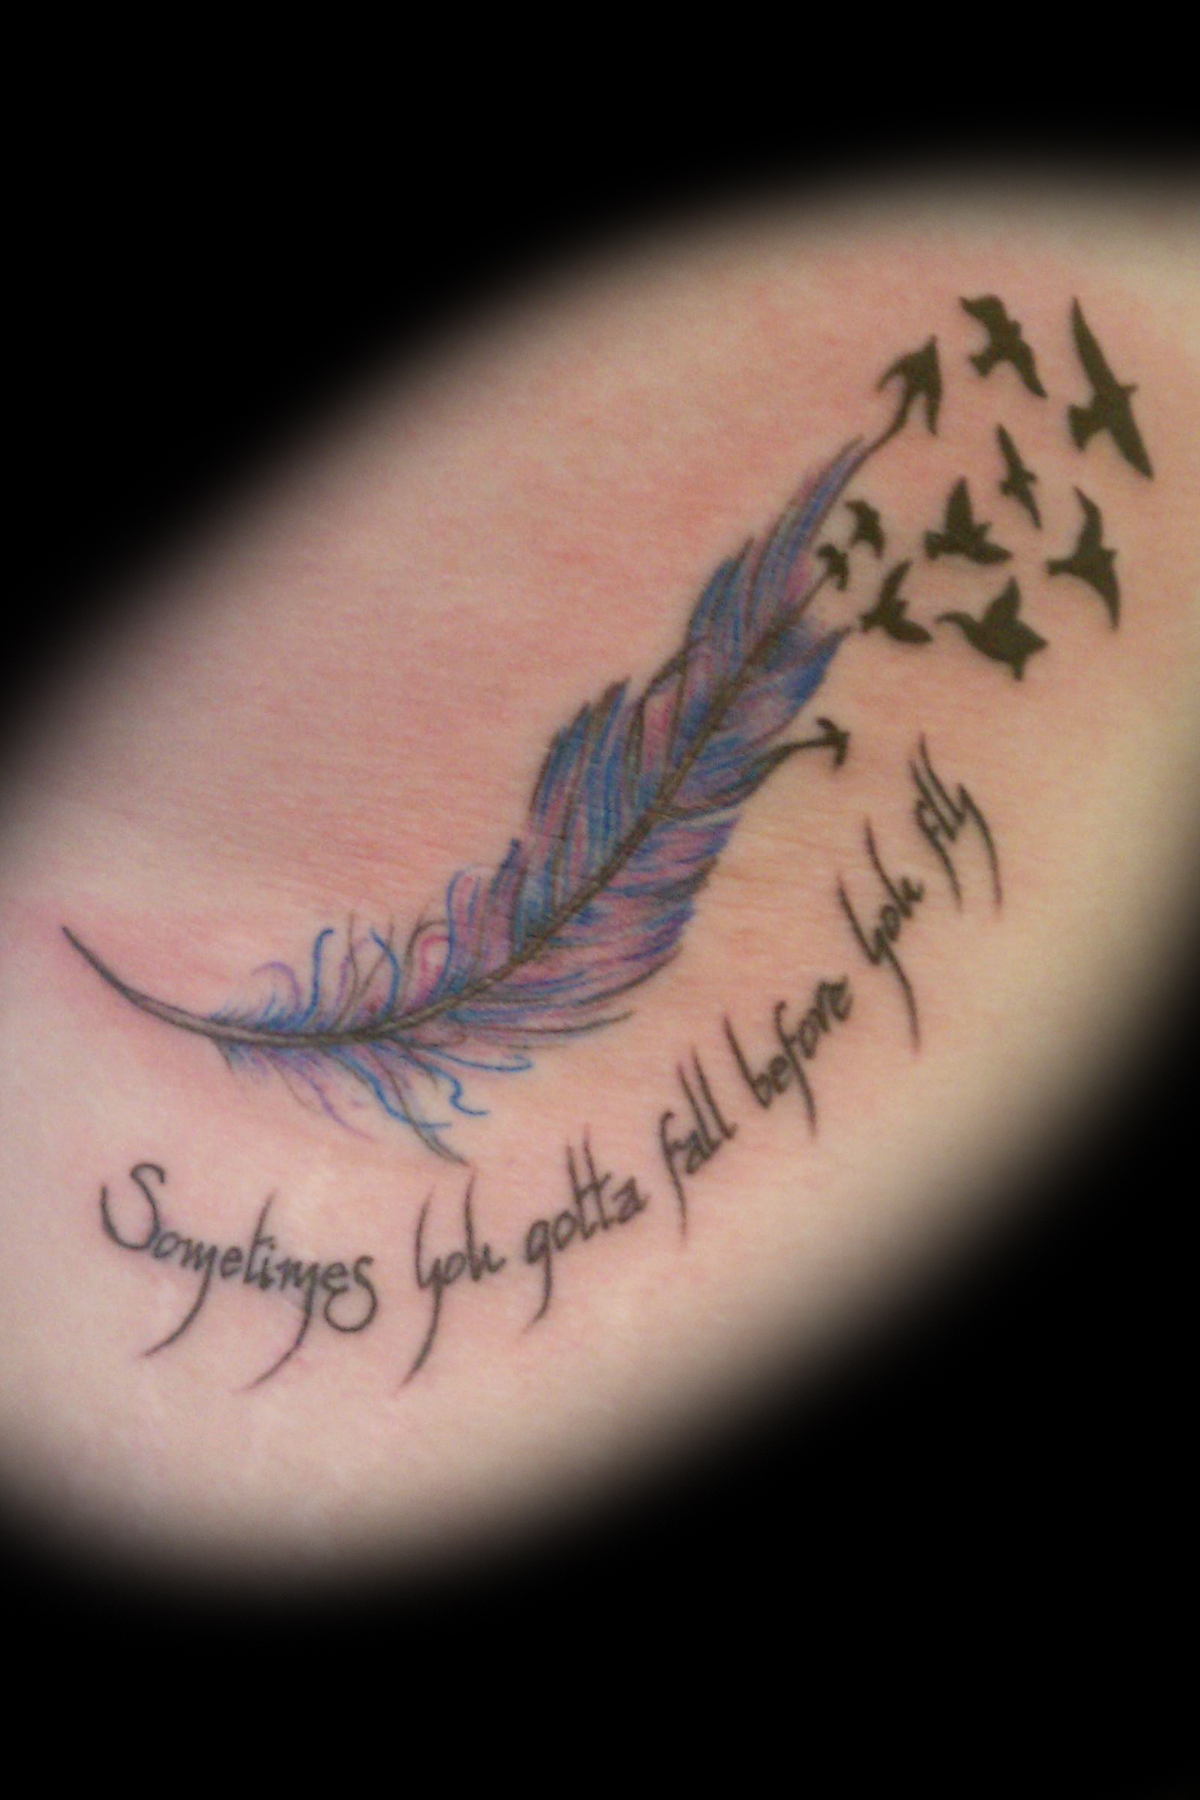 Feather Turning Into Birds With Script Tattoo throughout dimensions 1200 X 1800